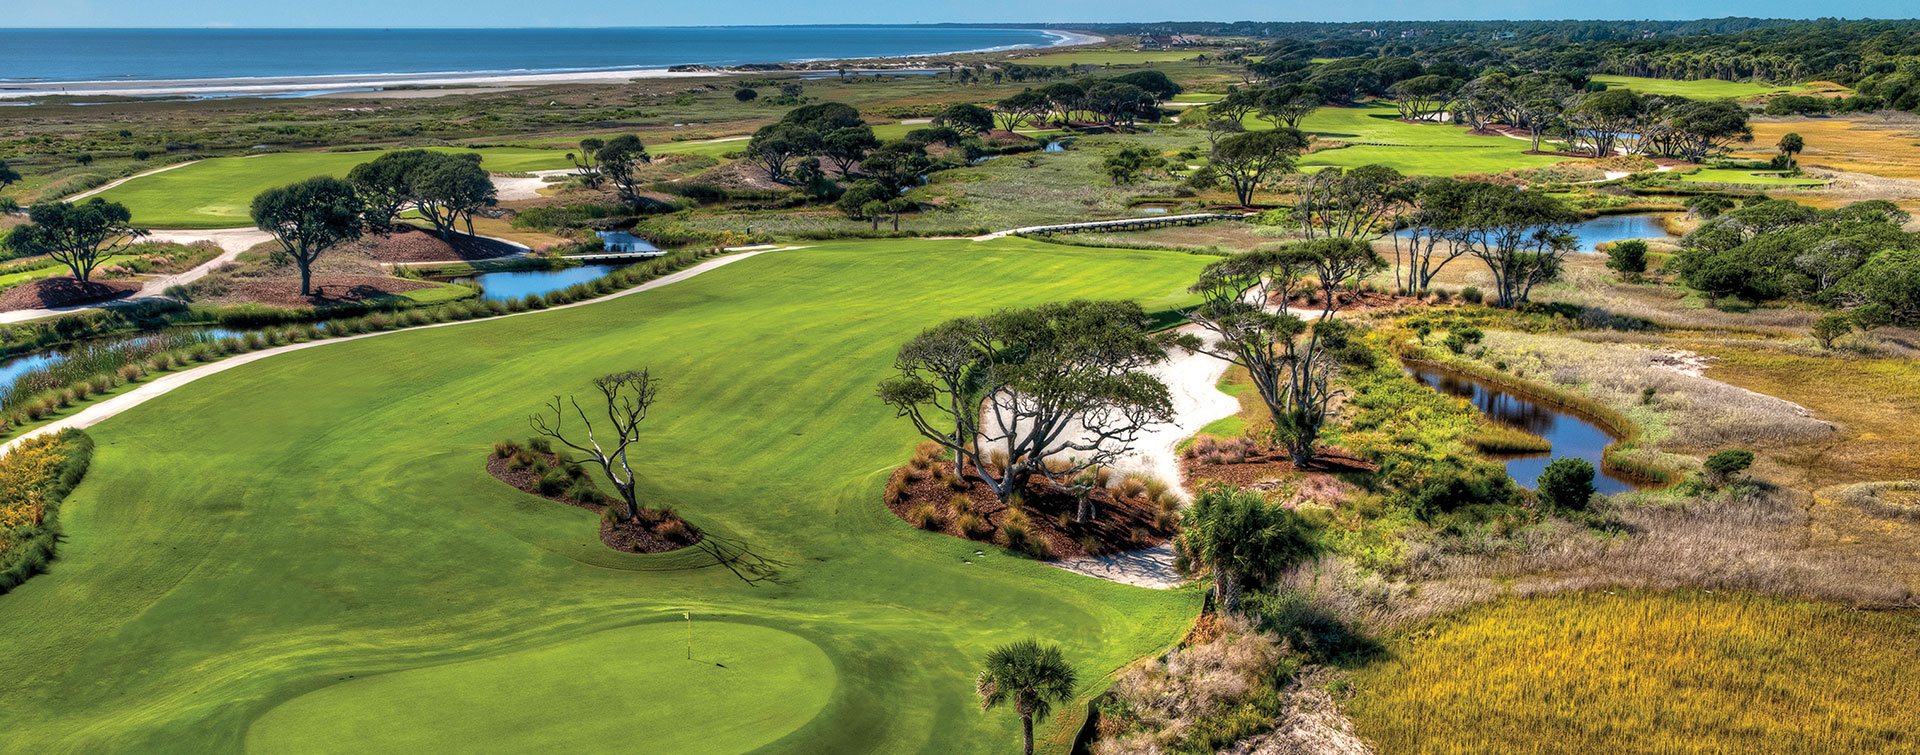 Strictly speaking, Kiawah Island's Ocean Course is not a links. But it's still a spectacular bucket-list golf course. (Kiawah Island Resort)